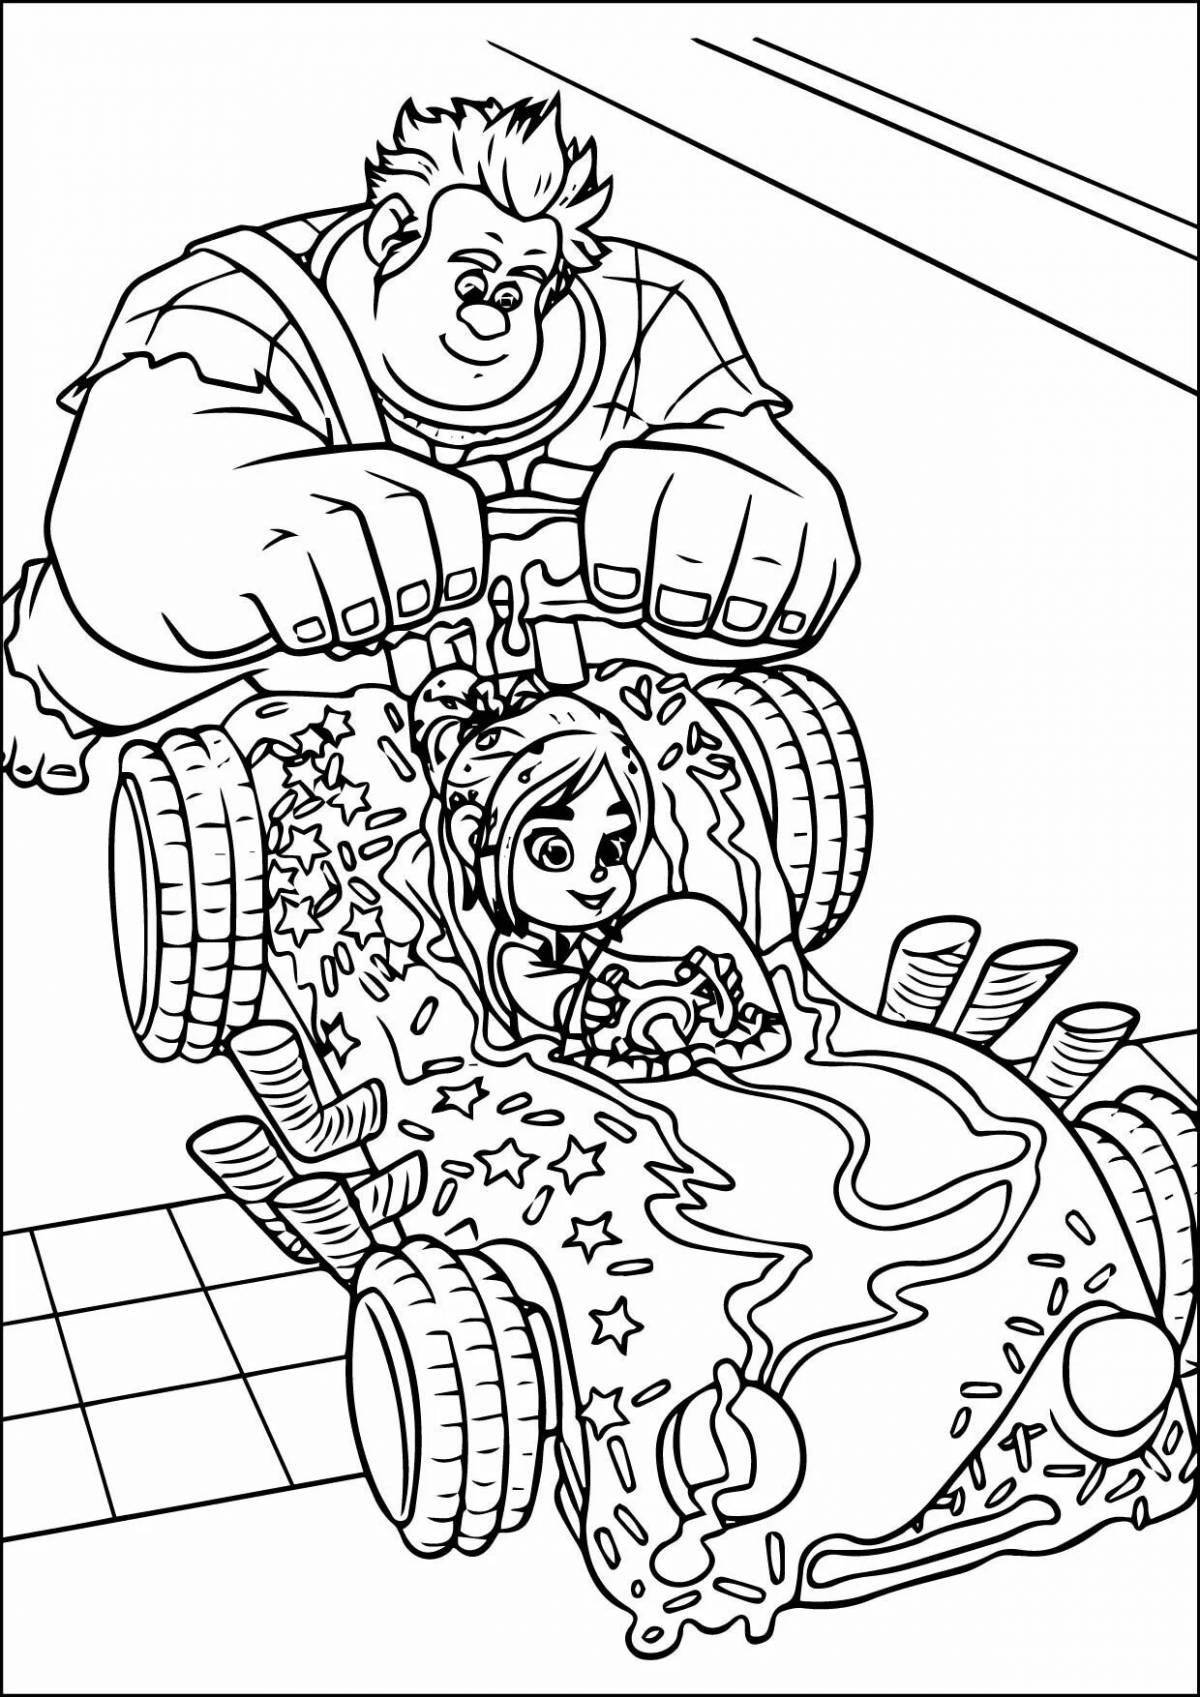 Adorable penelope coloring page